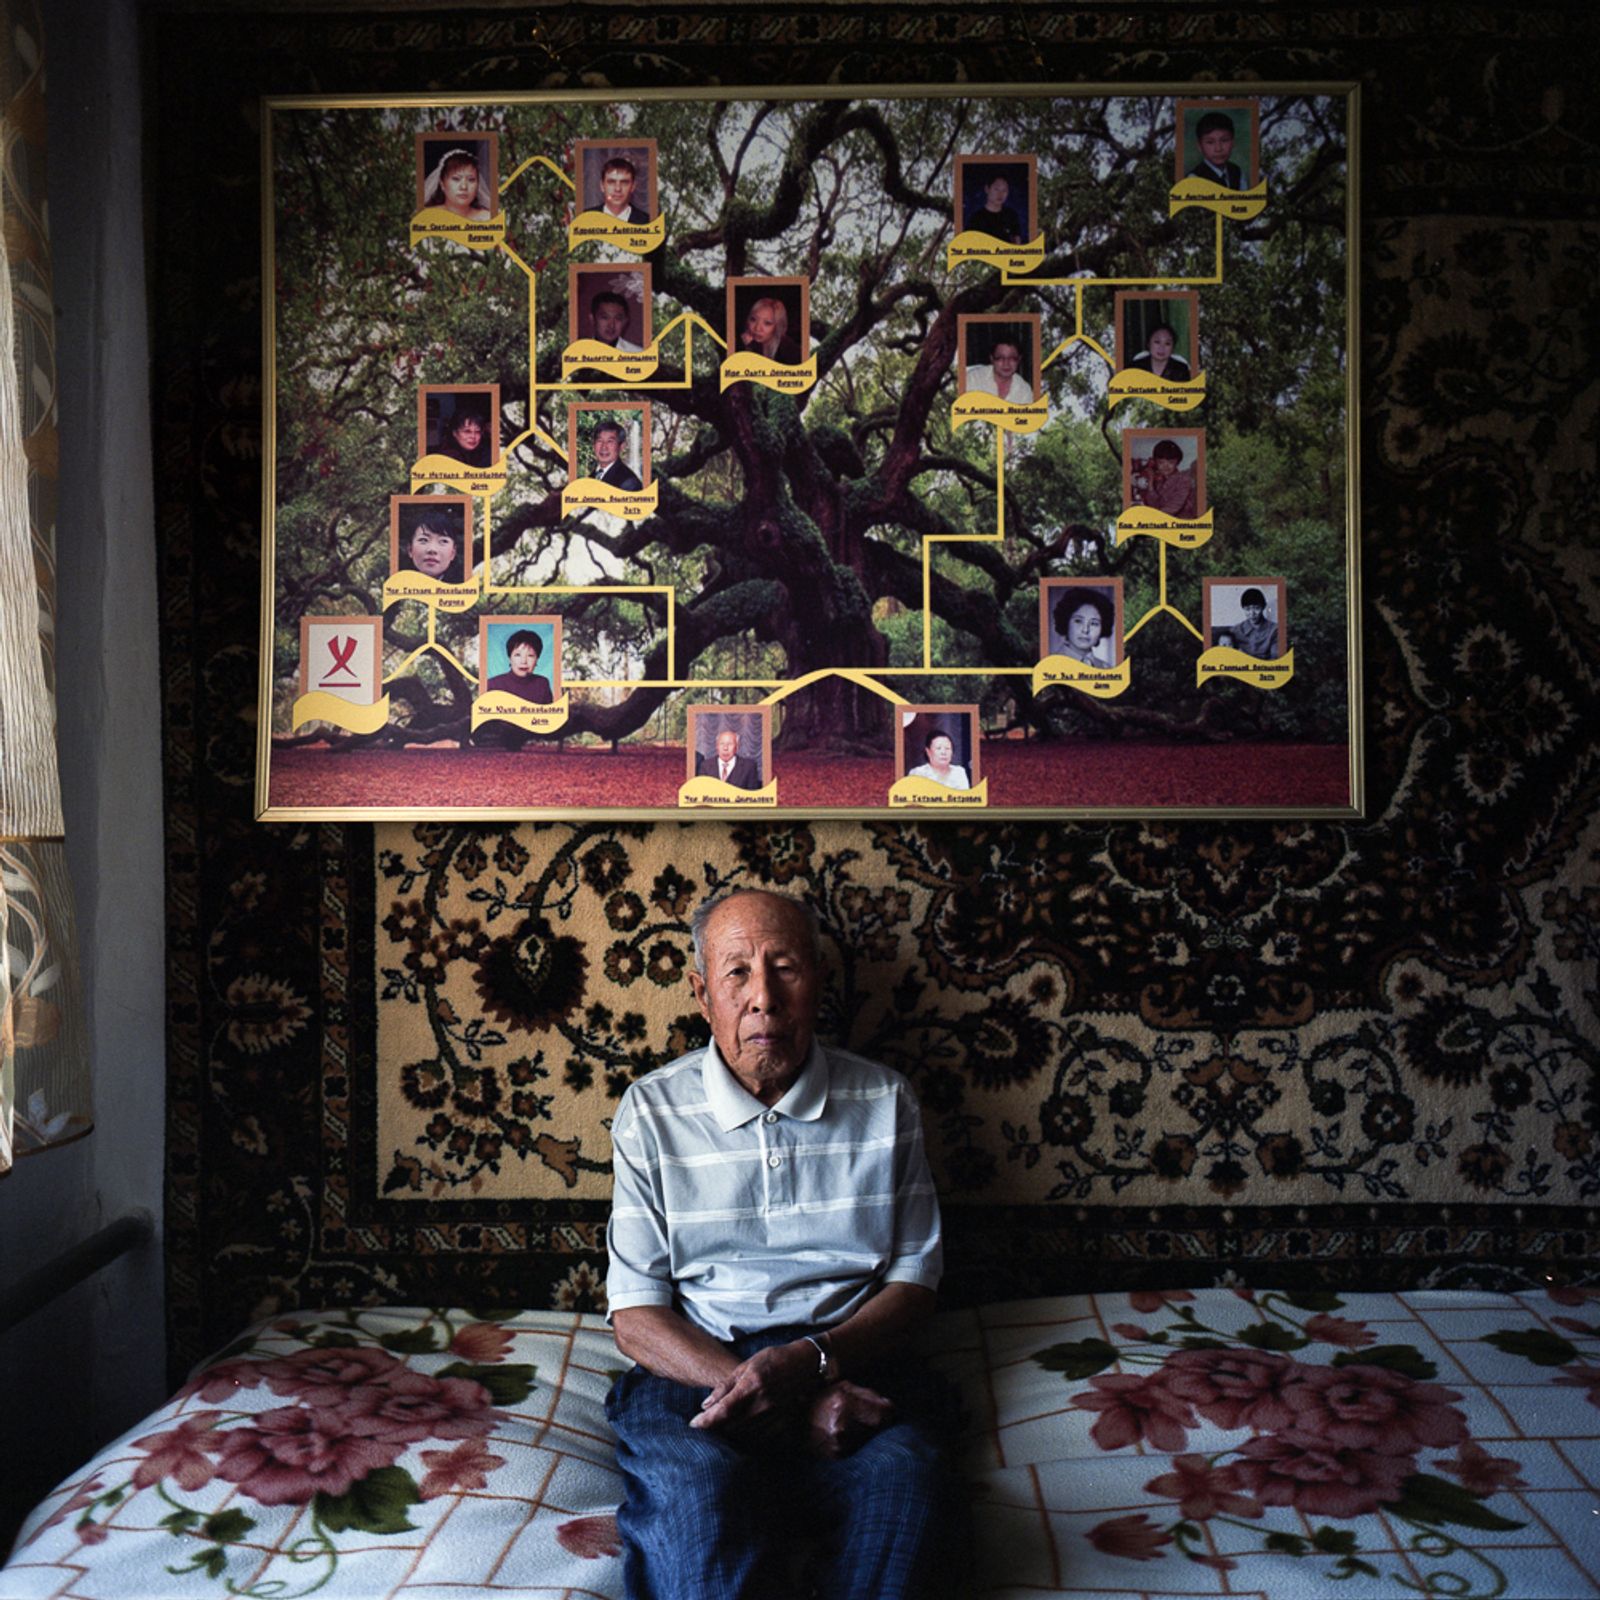 © Michael Vince Kim - Image from the The Koreans of Kazakhstan photography project